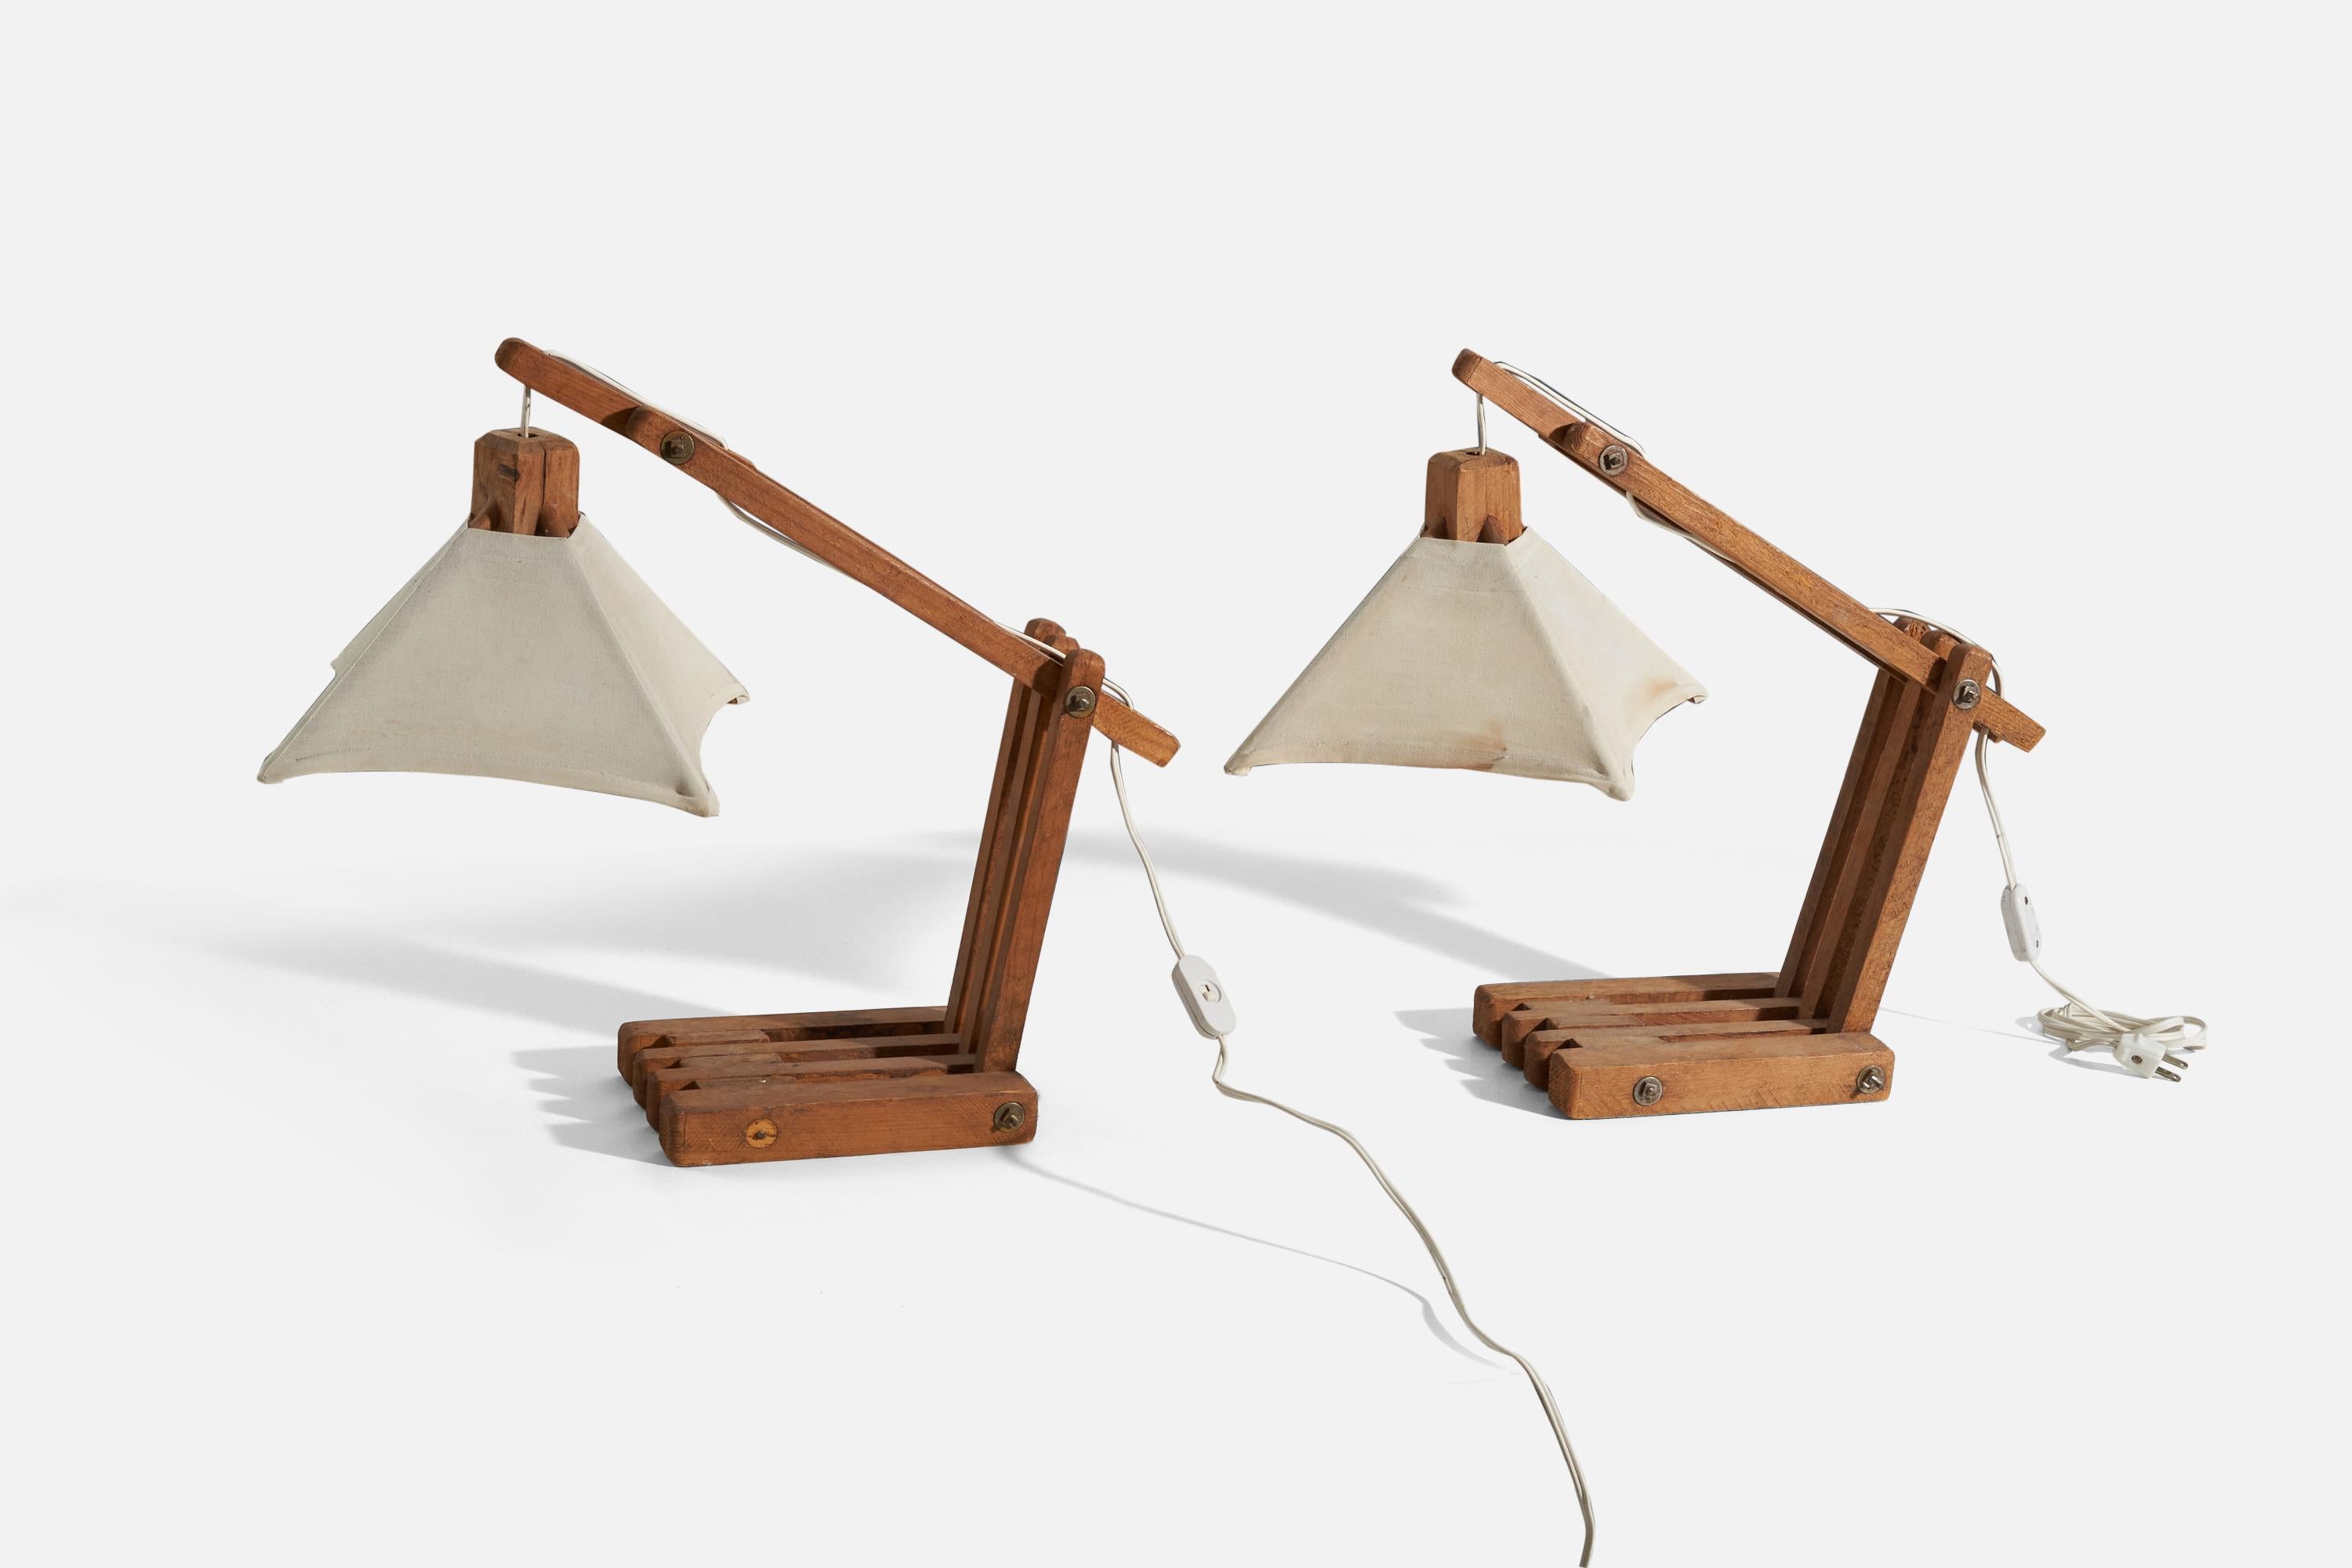 A pair of adjustable table lamps in oak and fabric lampshades, designed and produced in America, 1970s.

Lampshades are included in purchase.
Variable dimensions. Dimensions listed refer to the table lamps mounted as illustrated in the first